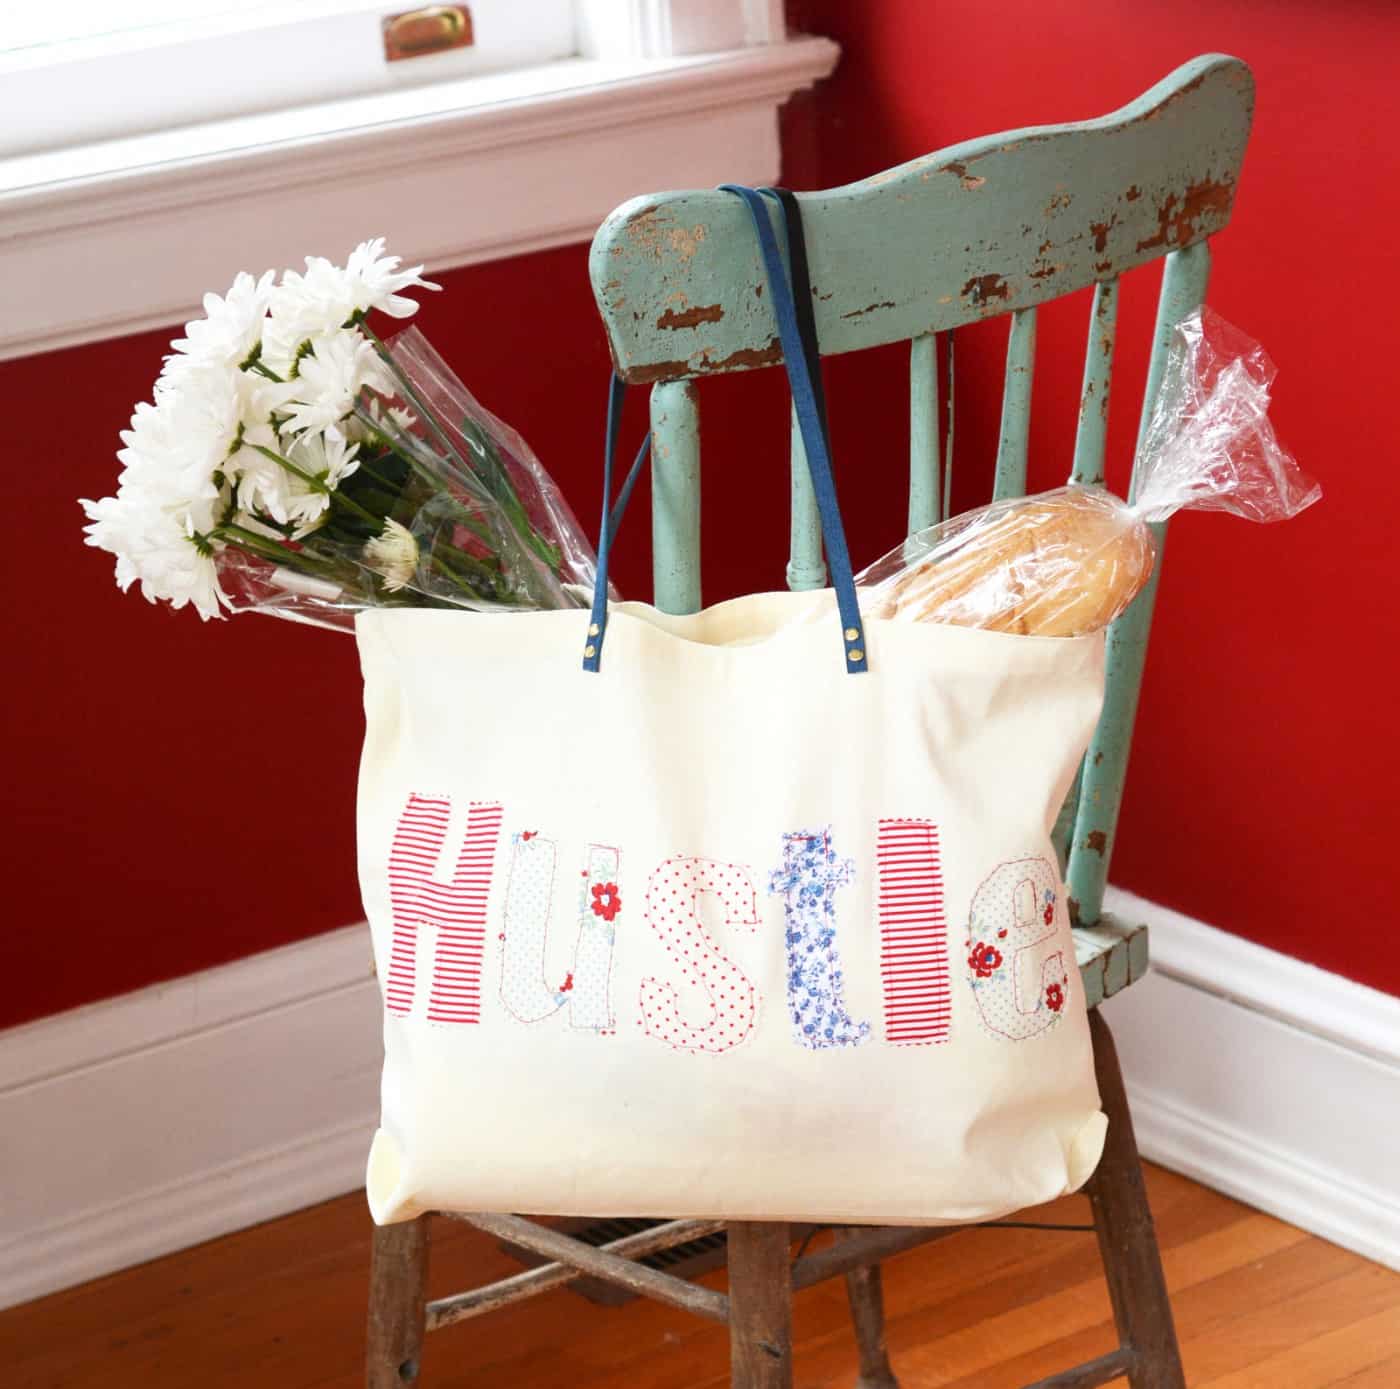 Are you all about the hustle? Show everyone that you are giving it your best with this unique DIY tote. The appliqué is easier than you think!